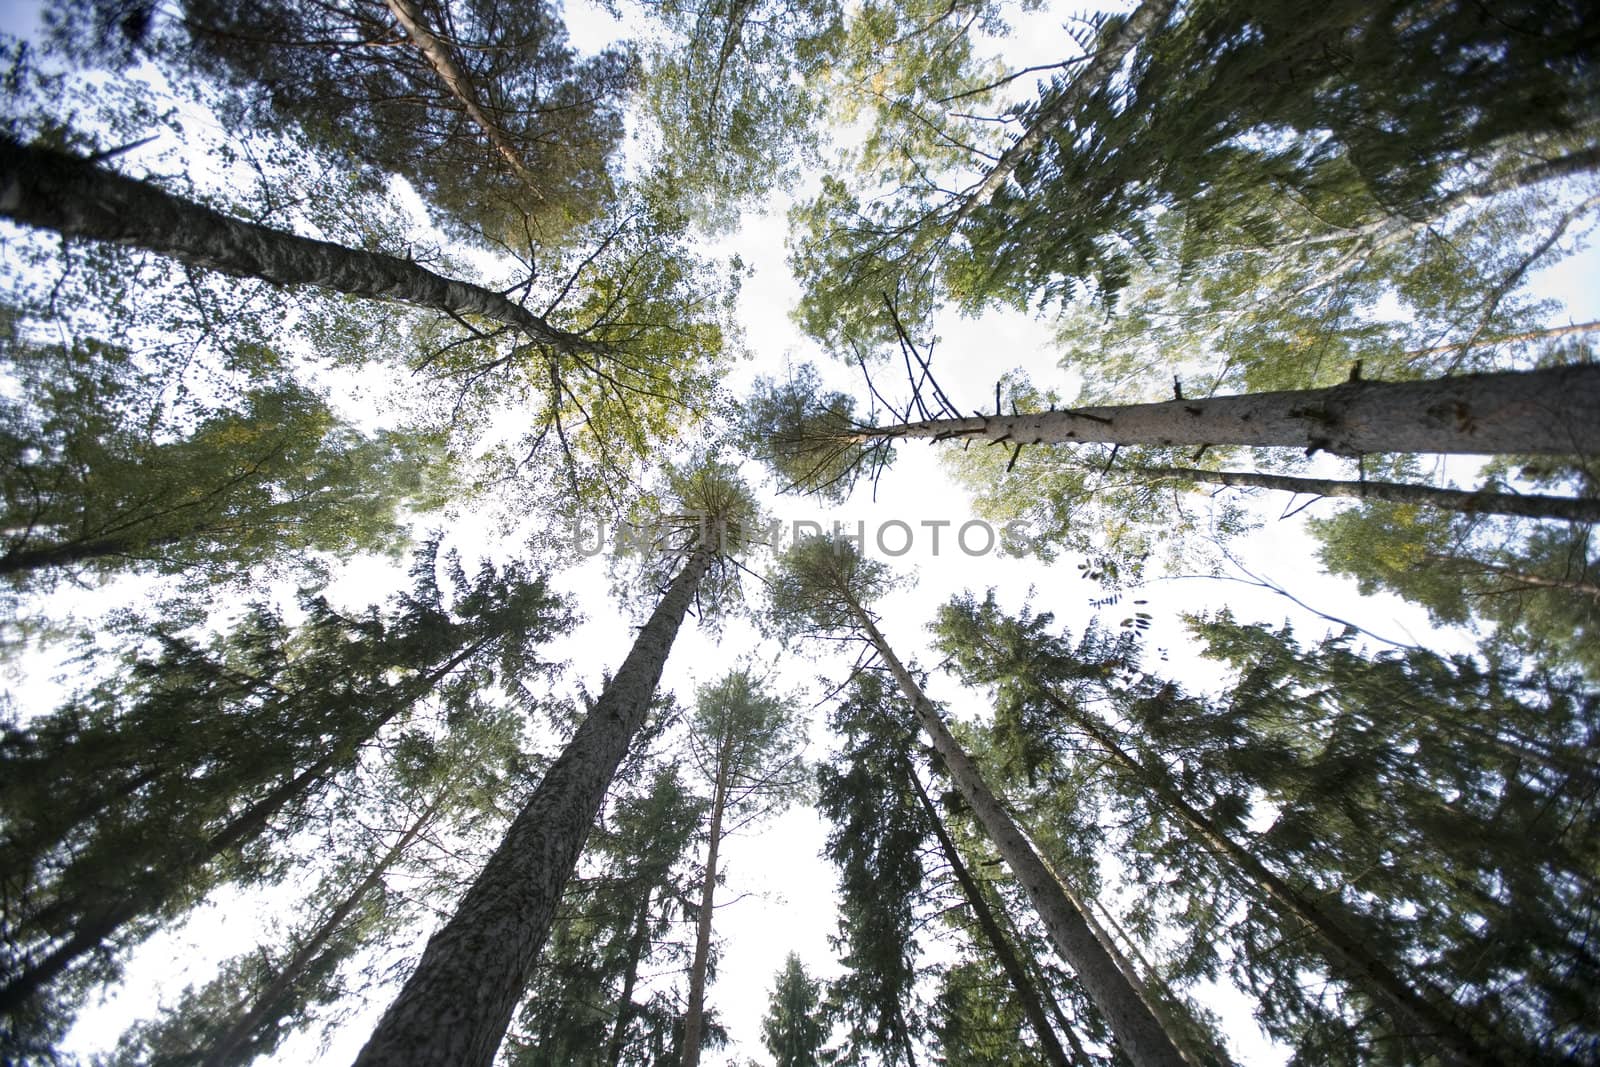 Large group of Pine trees from low angle view